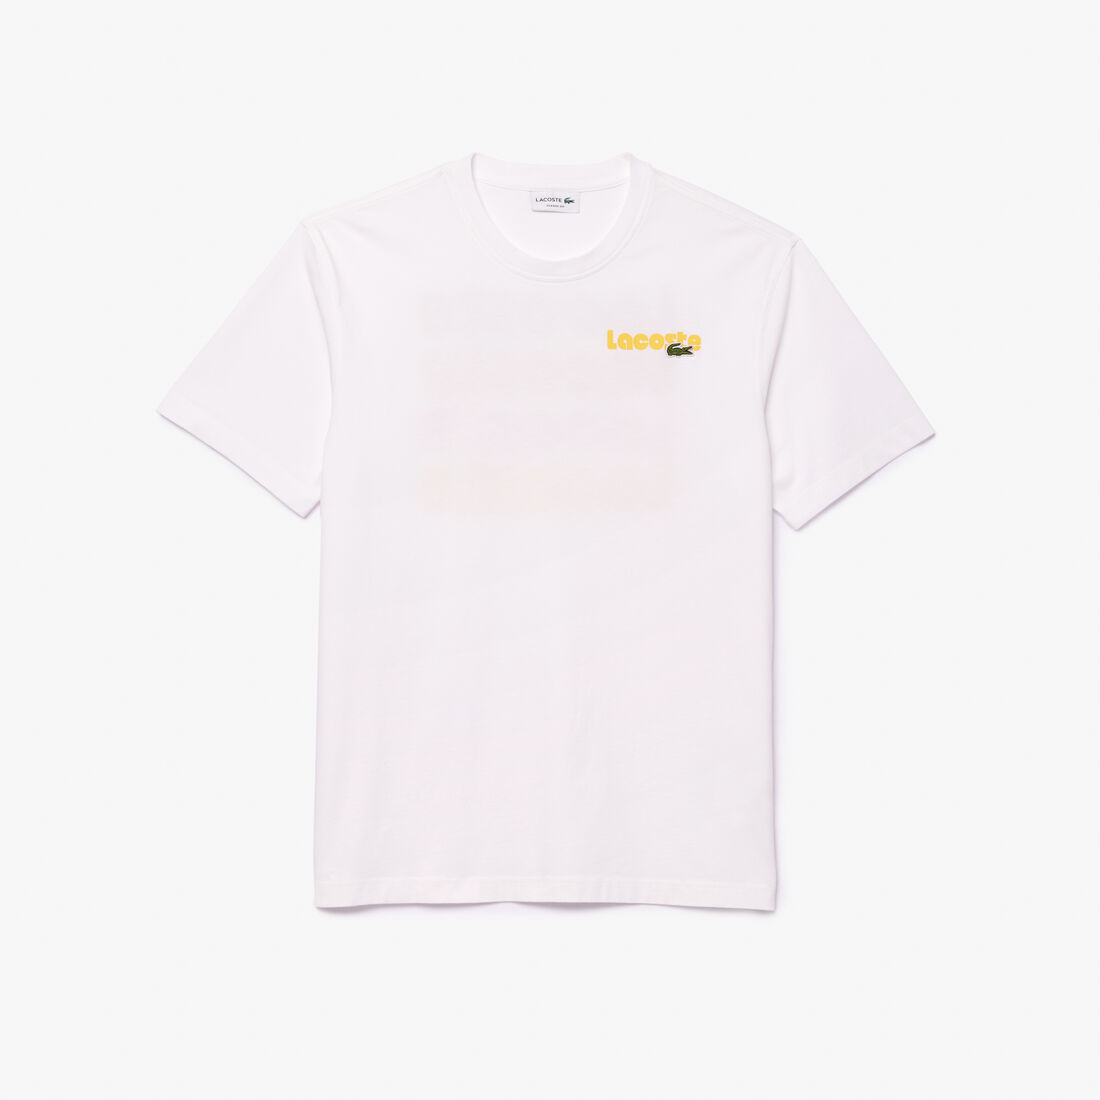 Washed Effect Ombré Lacoste Print T-shirt - TH7544-00-001